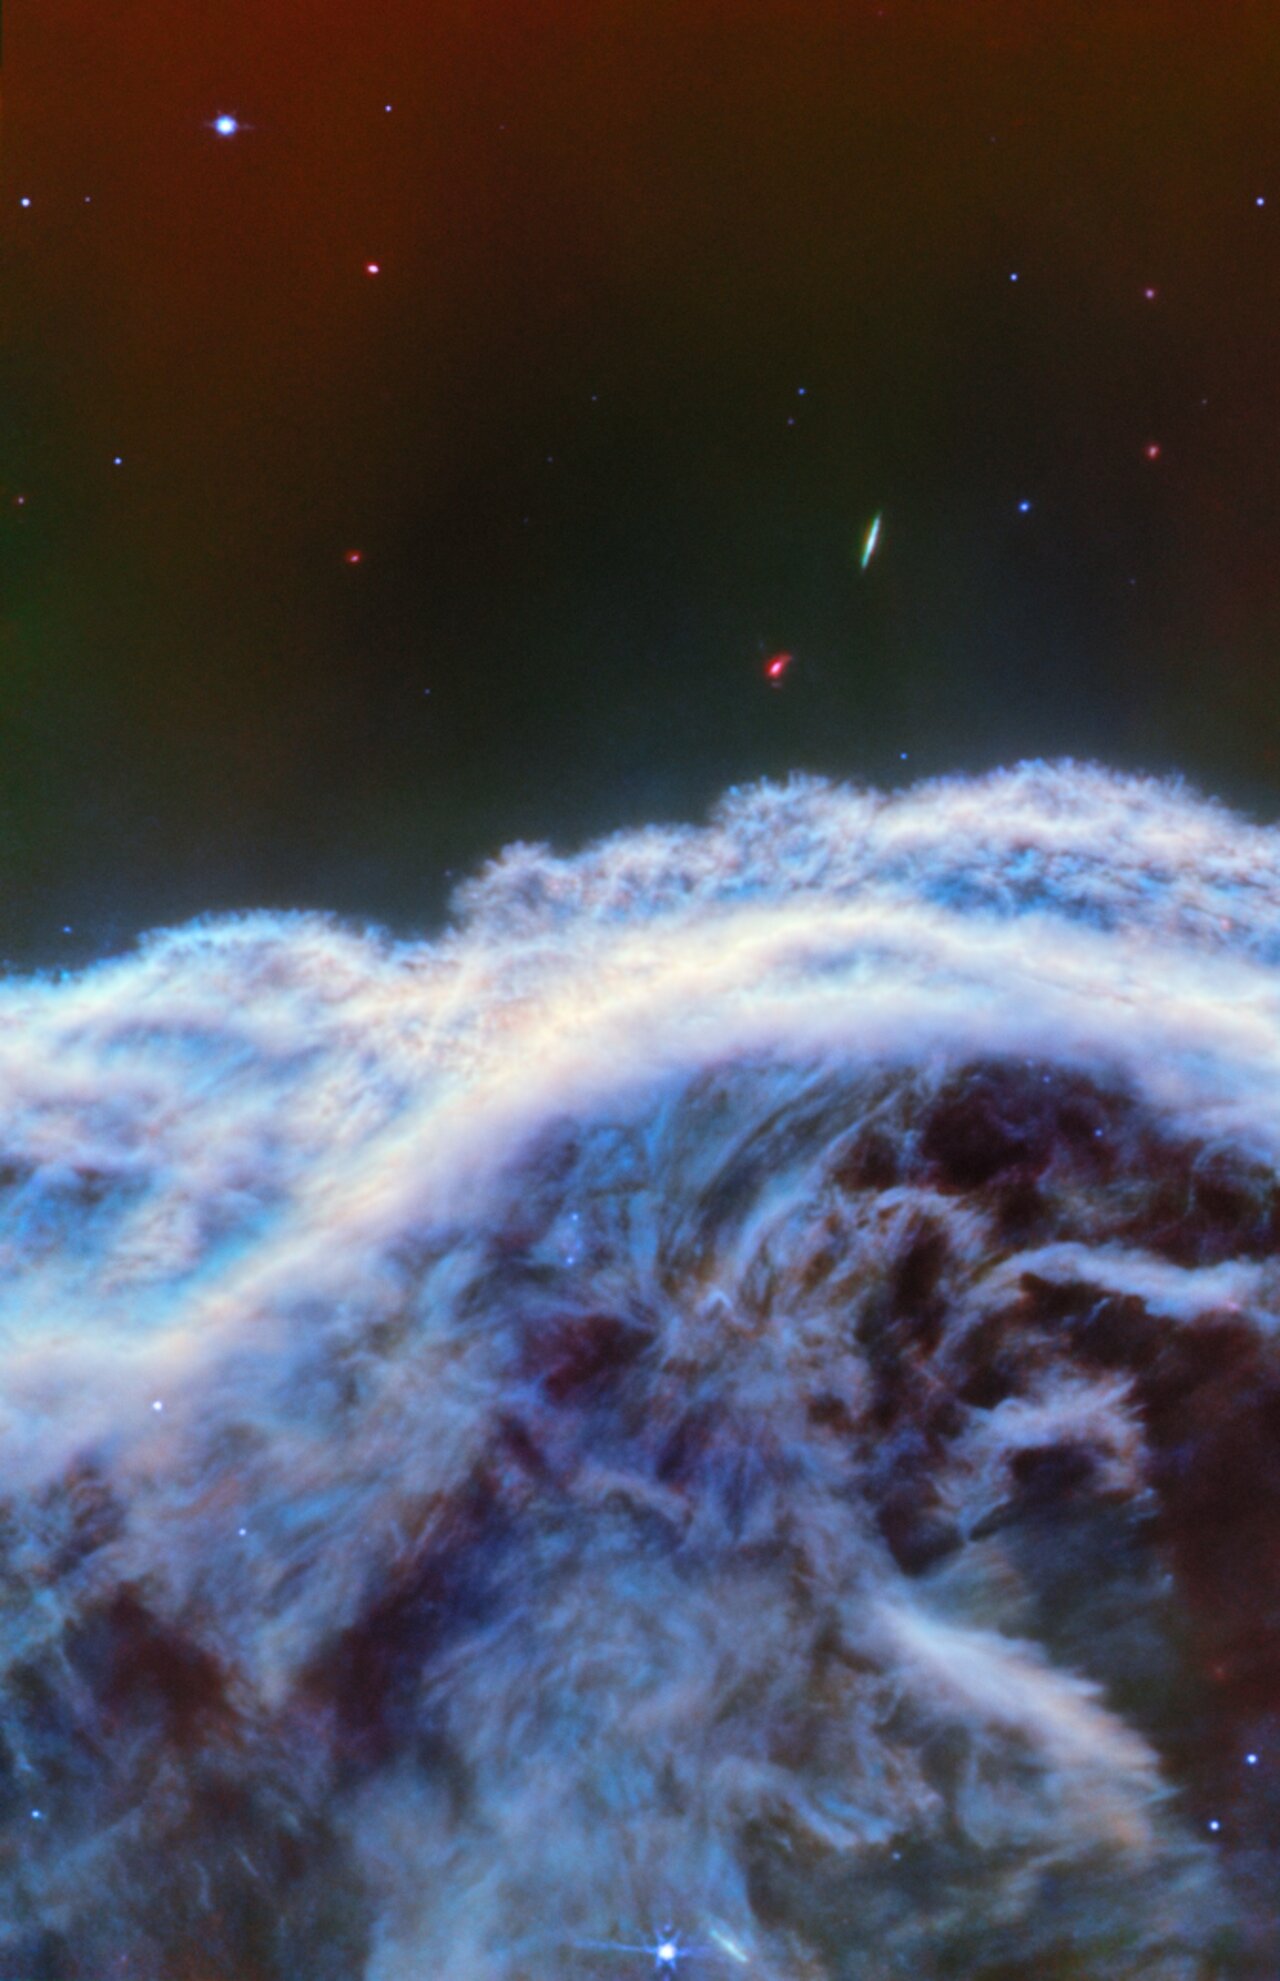 fuzzy wisps of blue and white gas in space